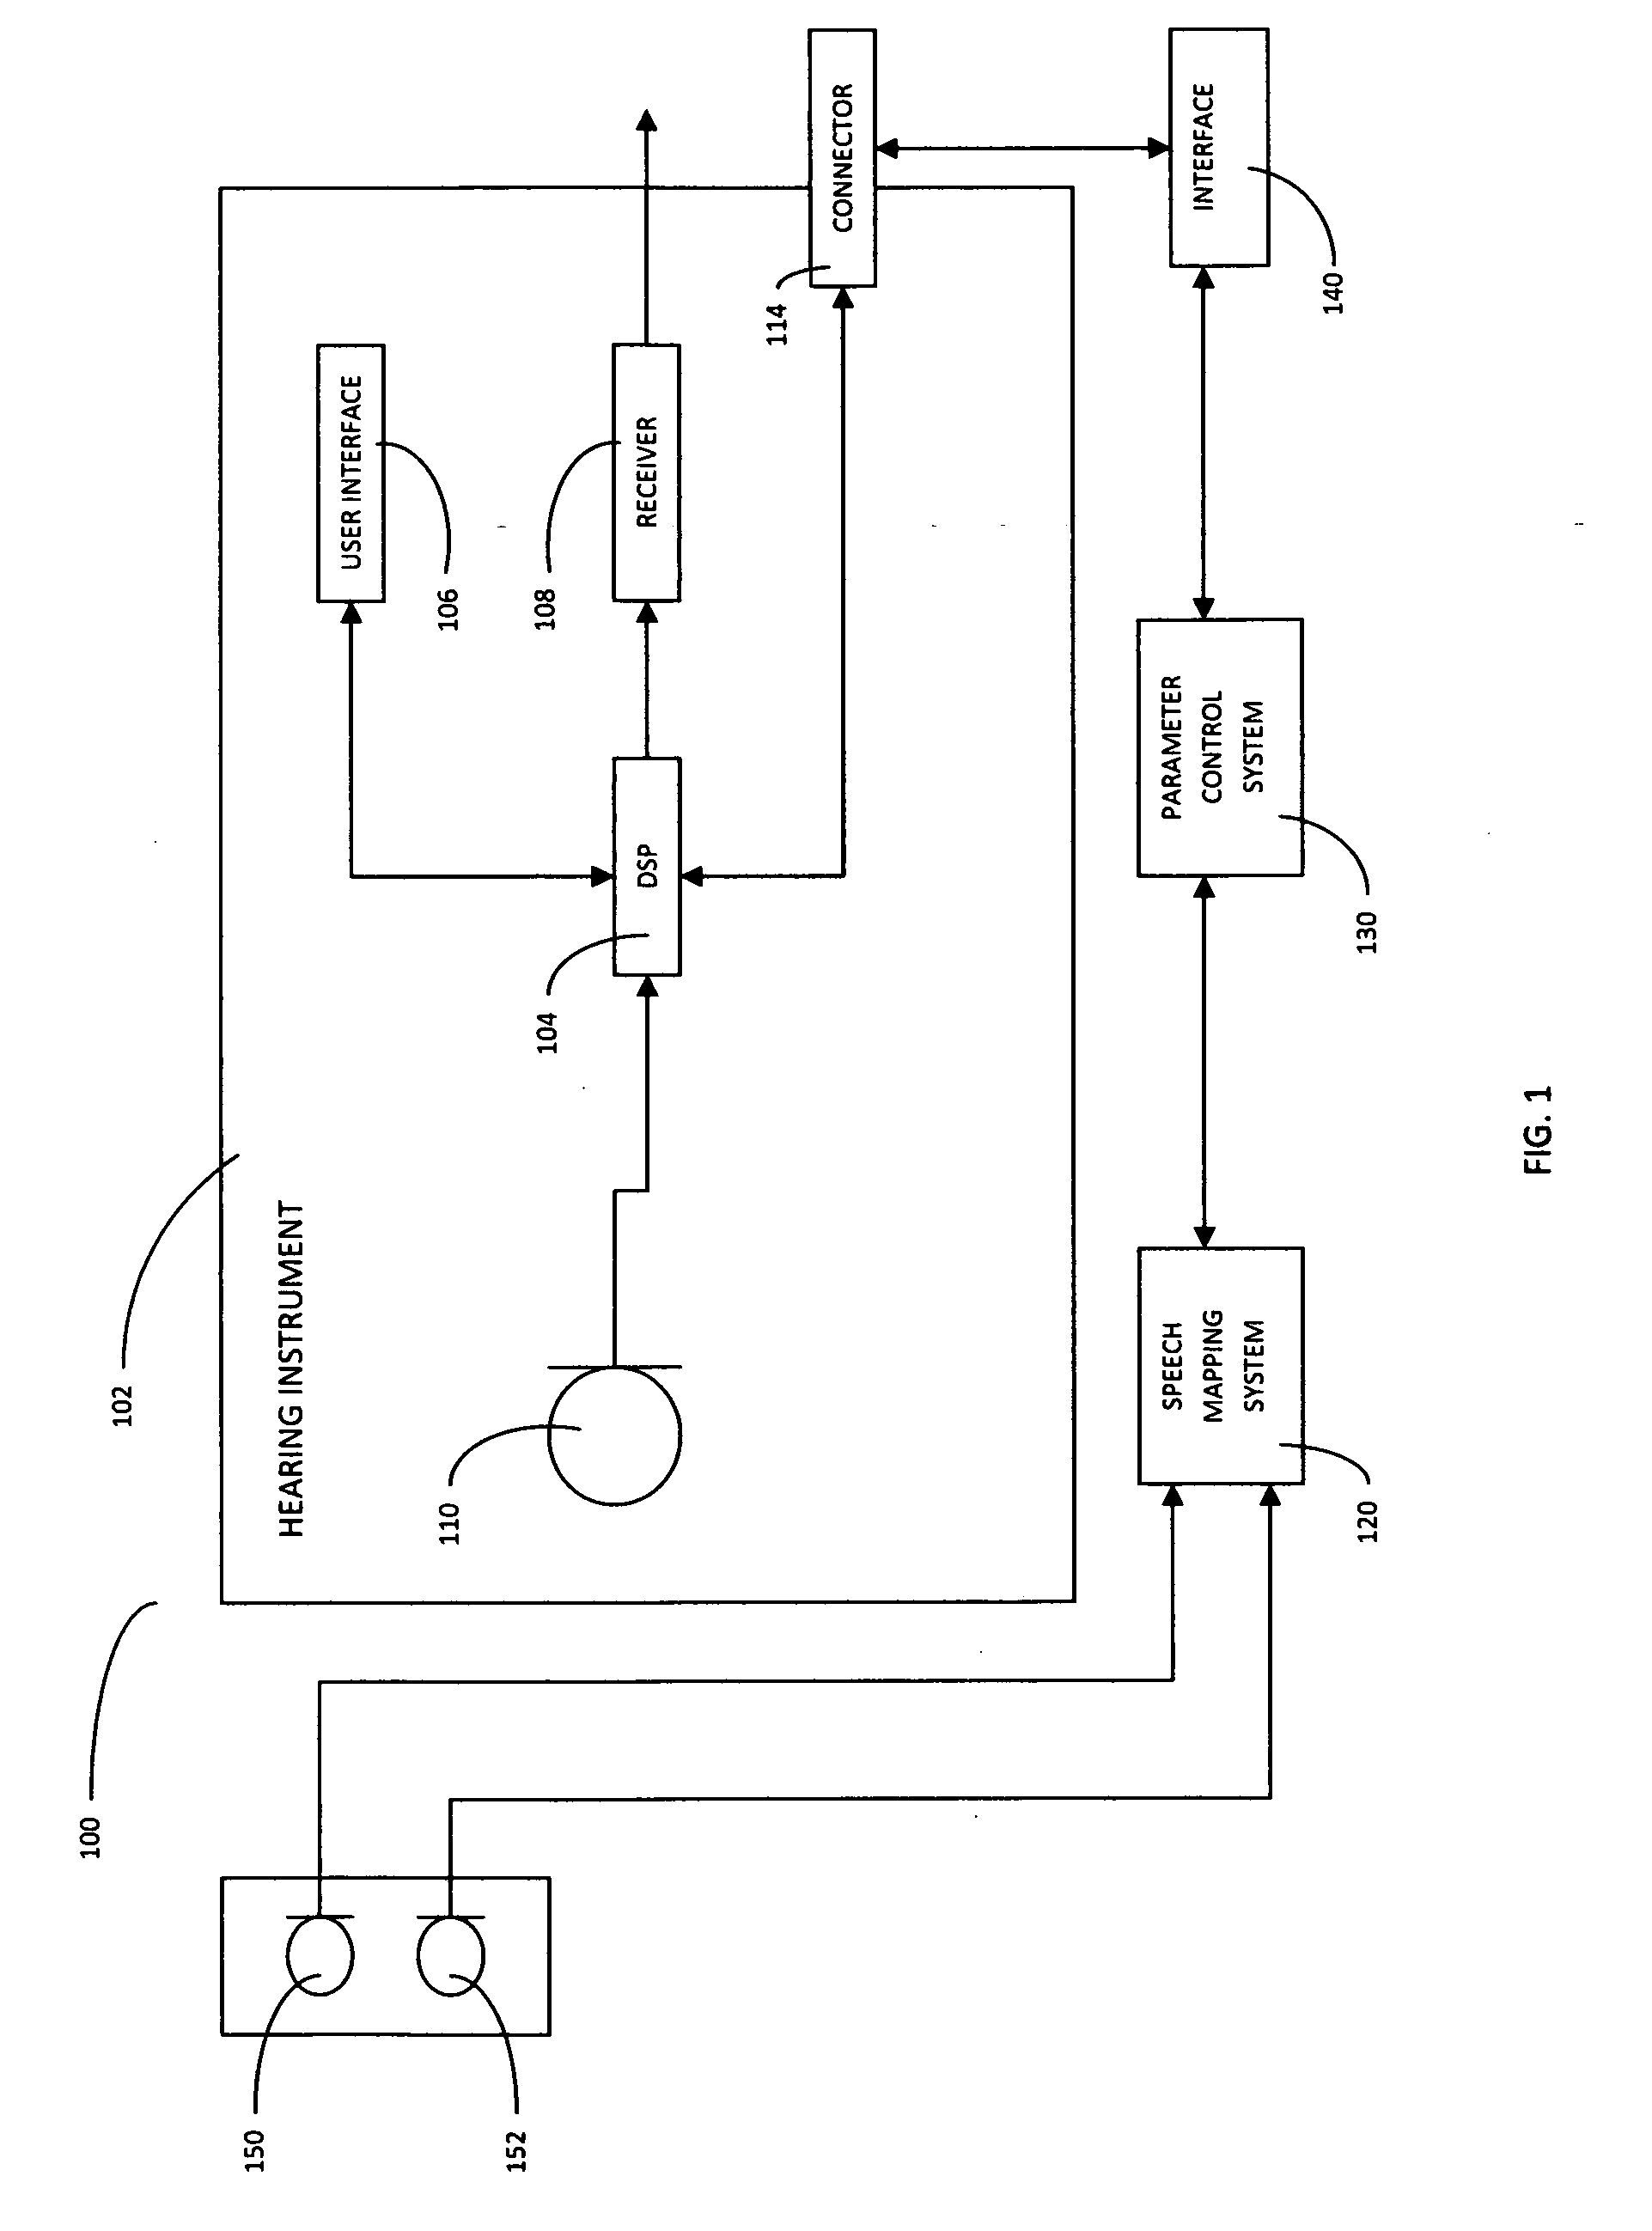 Automated real speech hearing instrument adjustment system